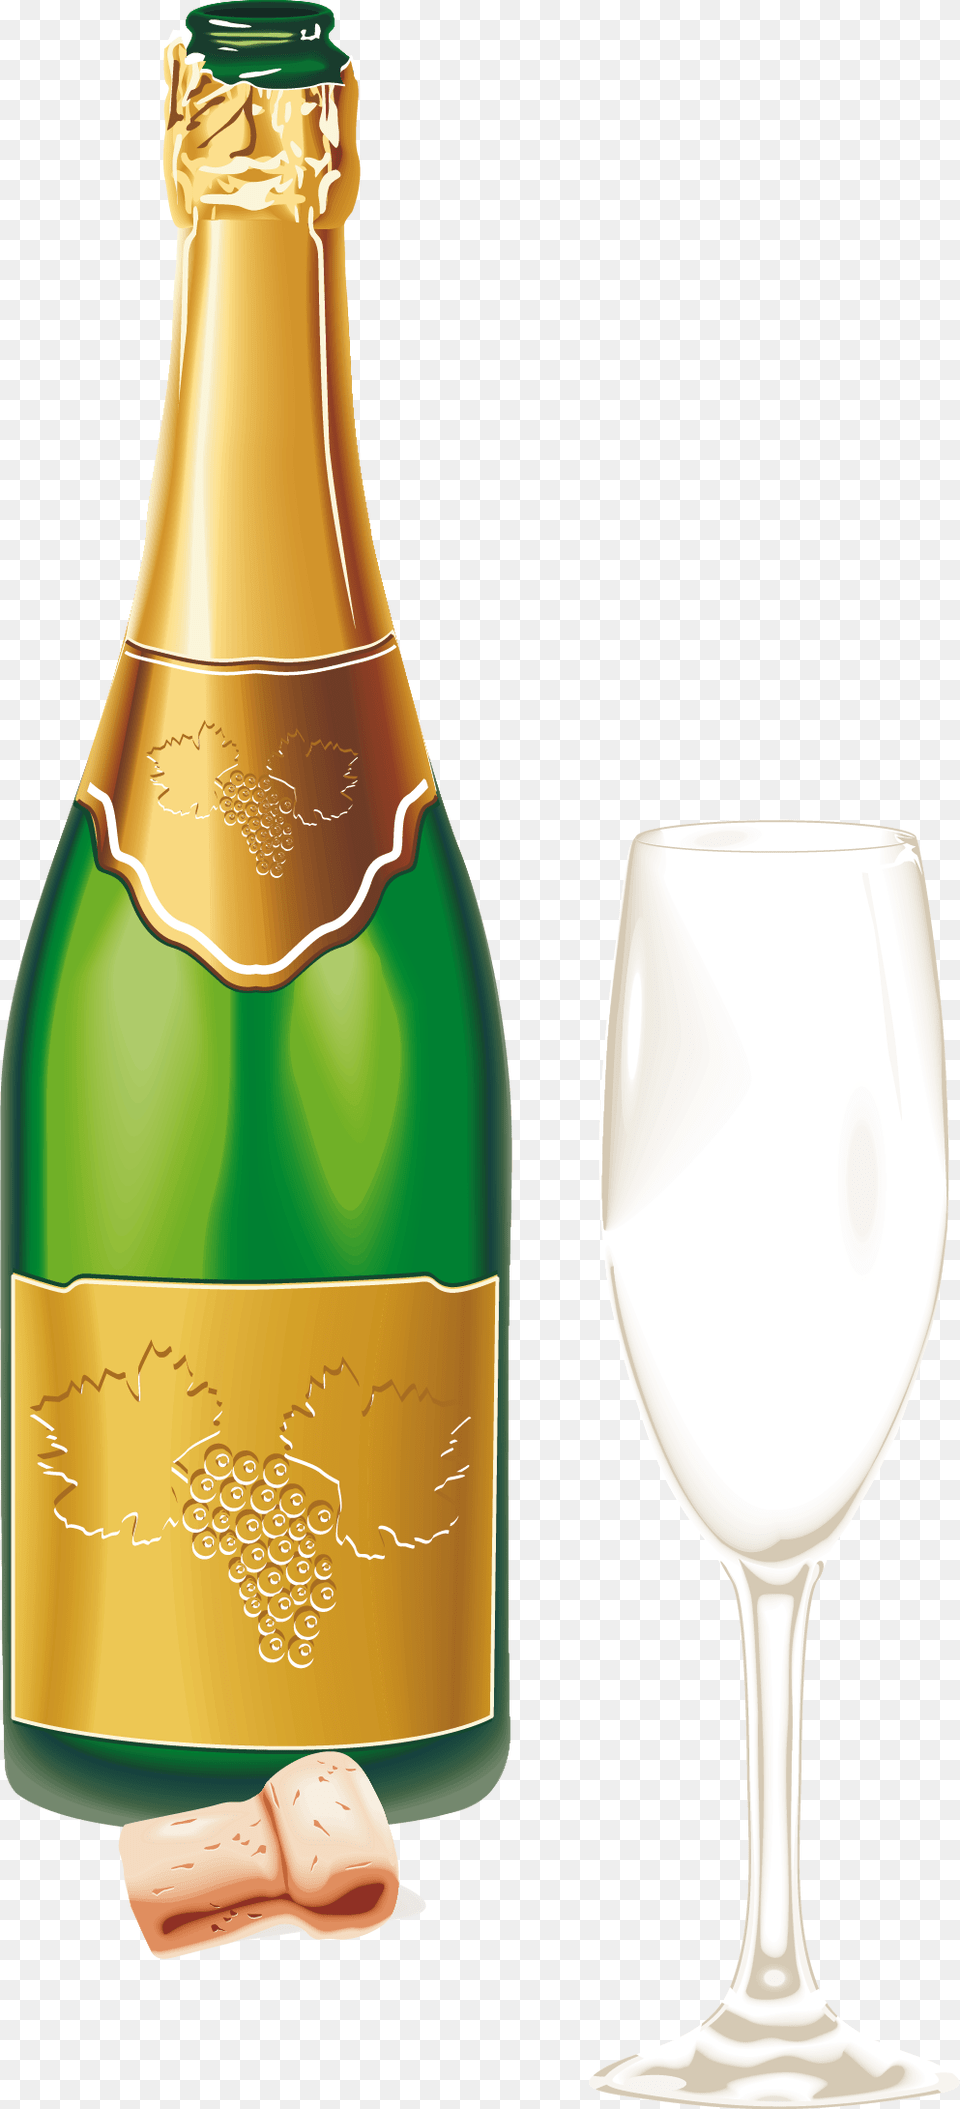 Champagne Images Champagne Bottle Glass, Wine, Liquor, Alcohol, Beverage Free Png Download